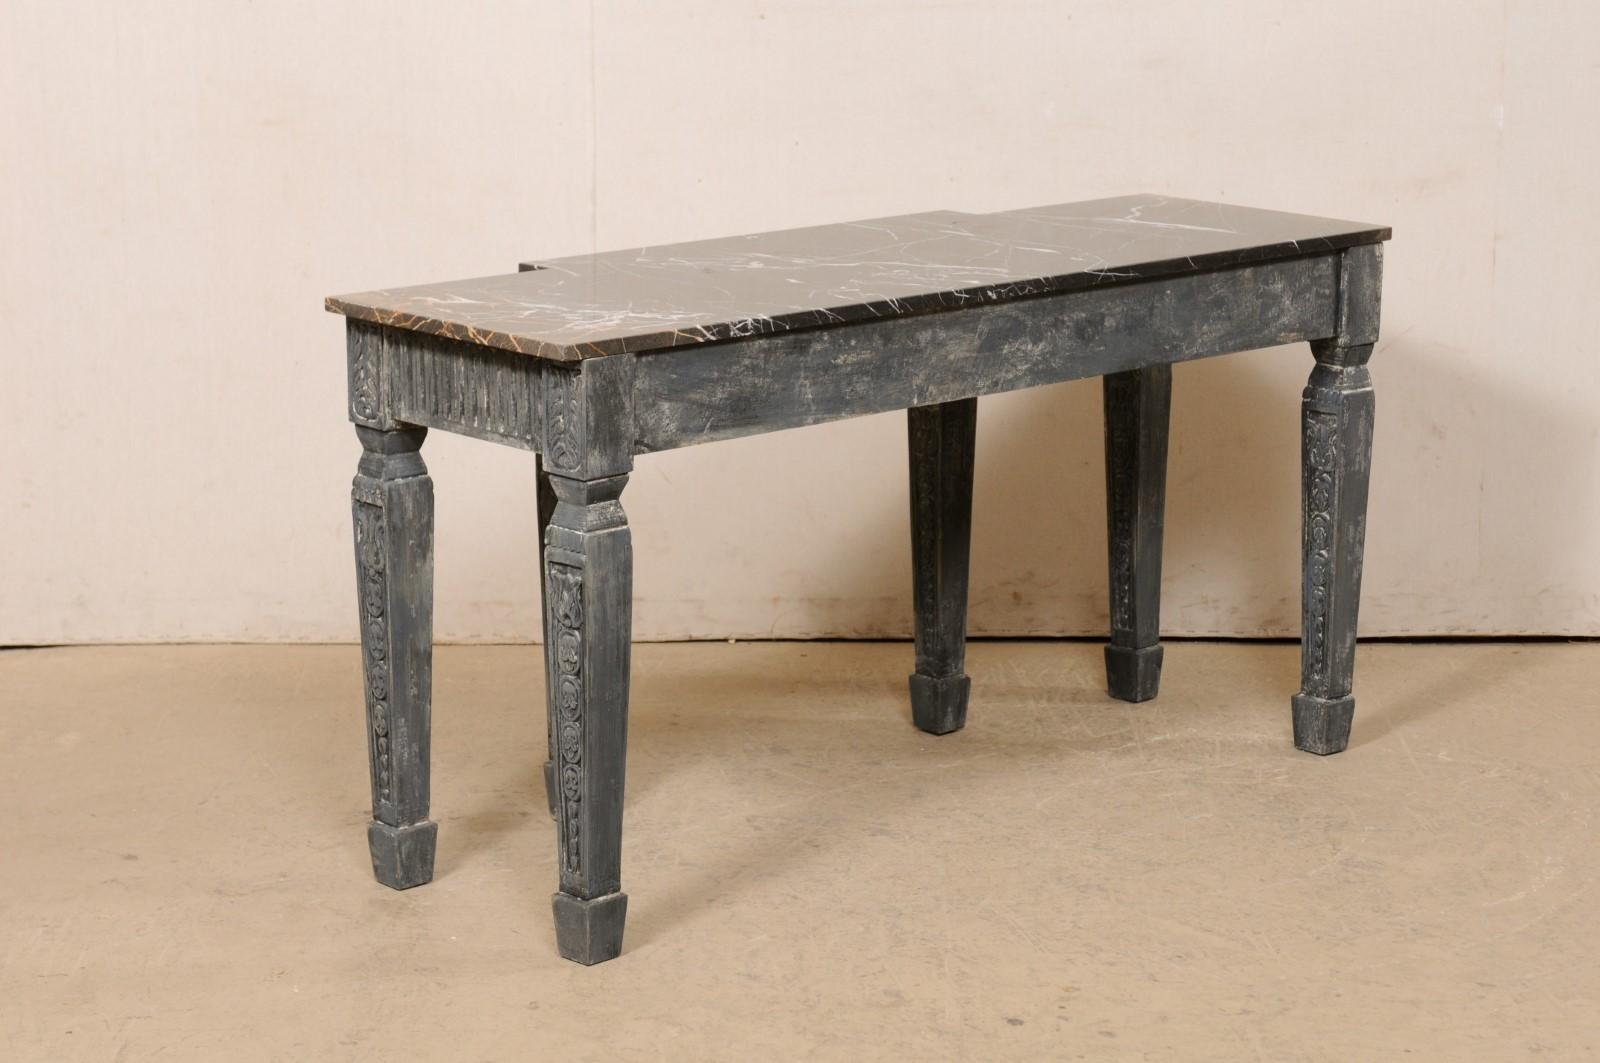 French Ornately-Carved Console Table W/Marble Top & Shallow Breakfront Design For Sale 3